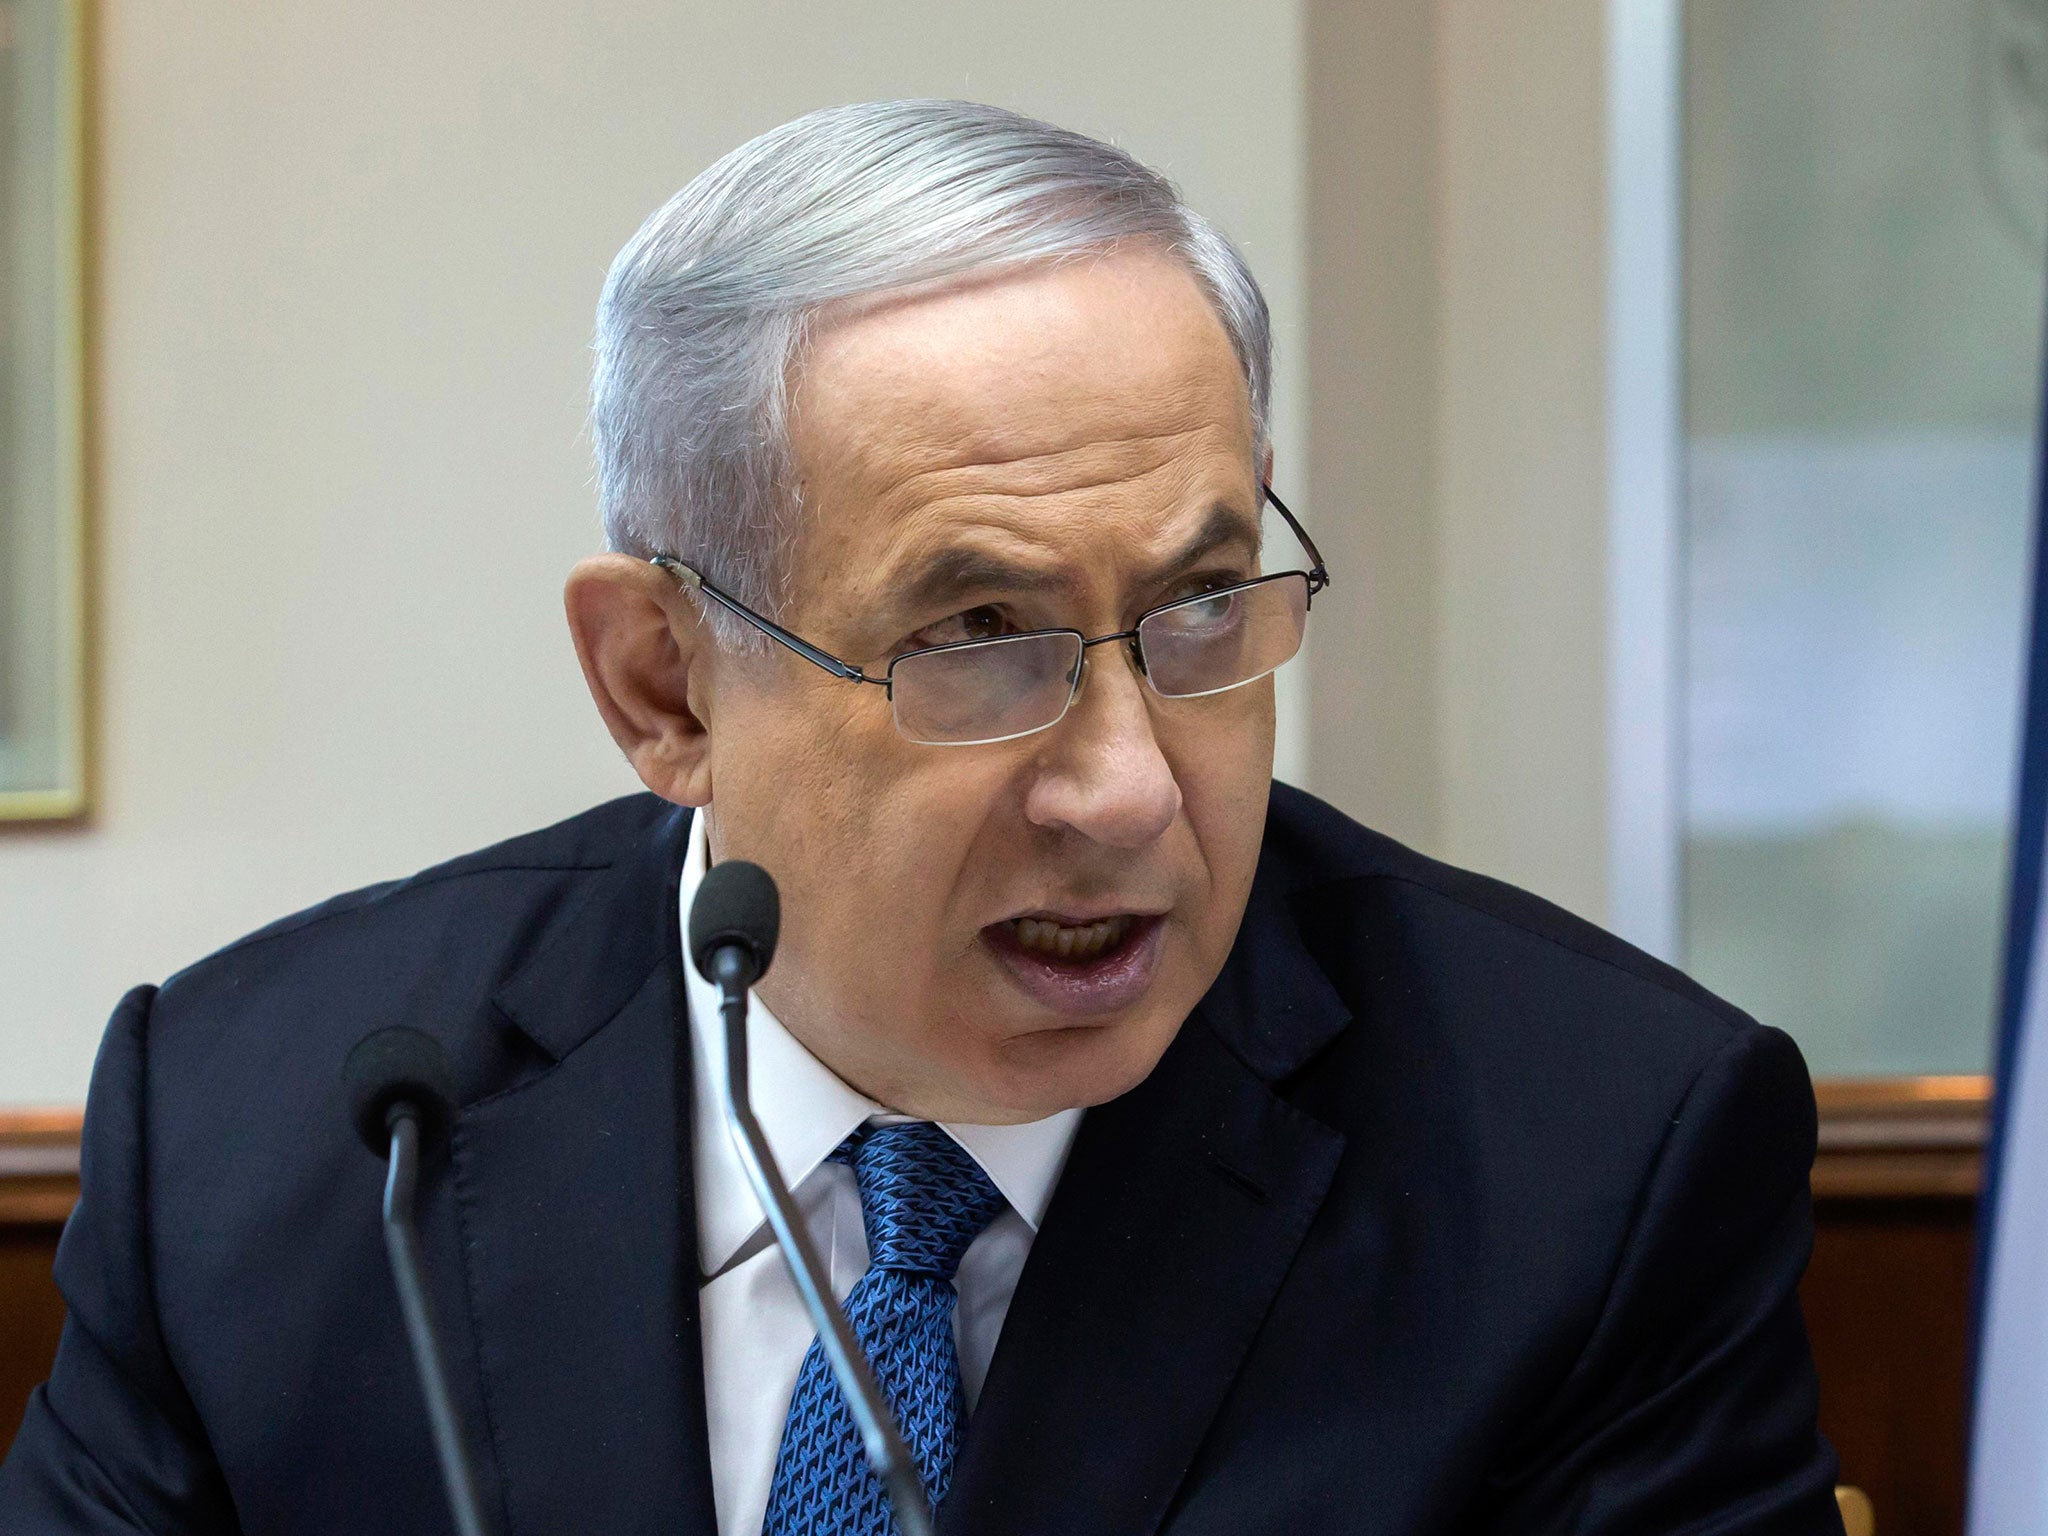 Prime Minister Benjamin Netanyahu’s cabinet backed draft legislation aimed at strengthening the Jewish character of the Israeli state, a move liberals warn will undermine democracy and heighten discrimination against Arab citizens